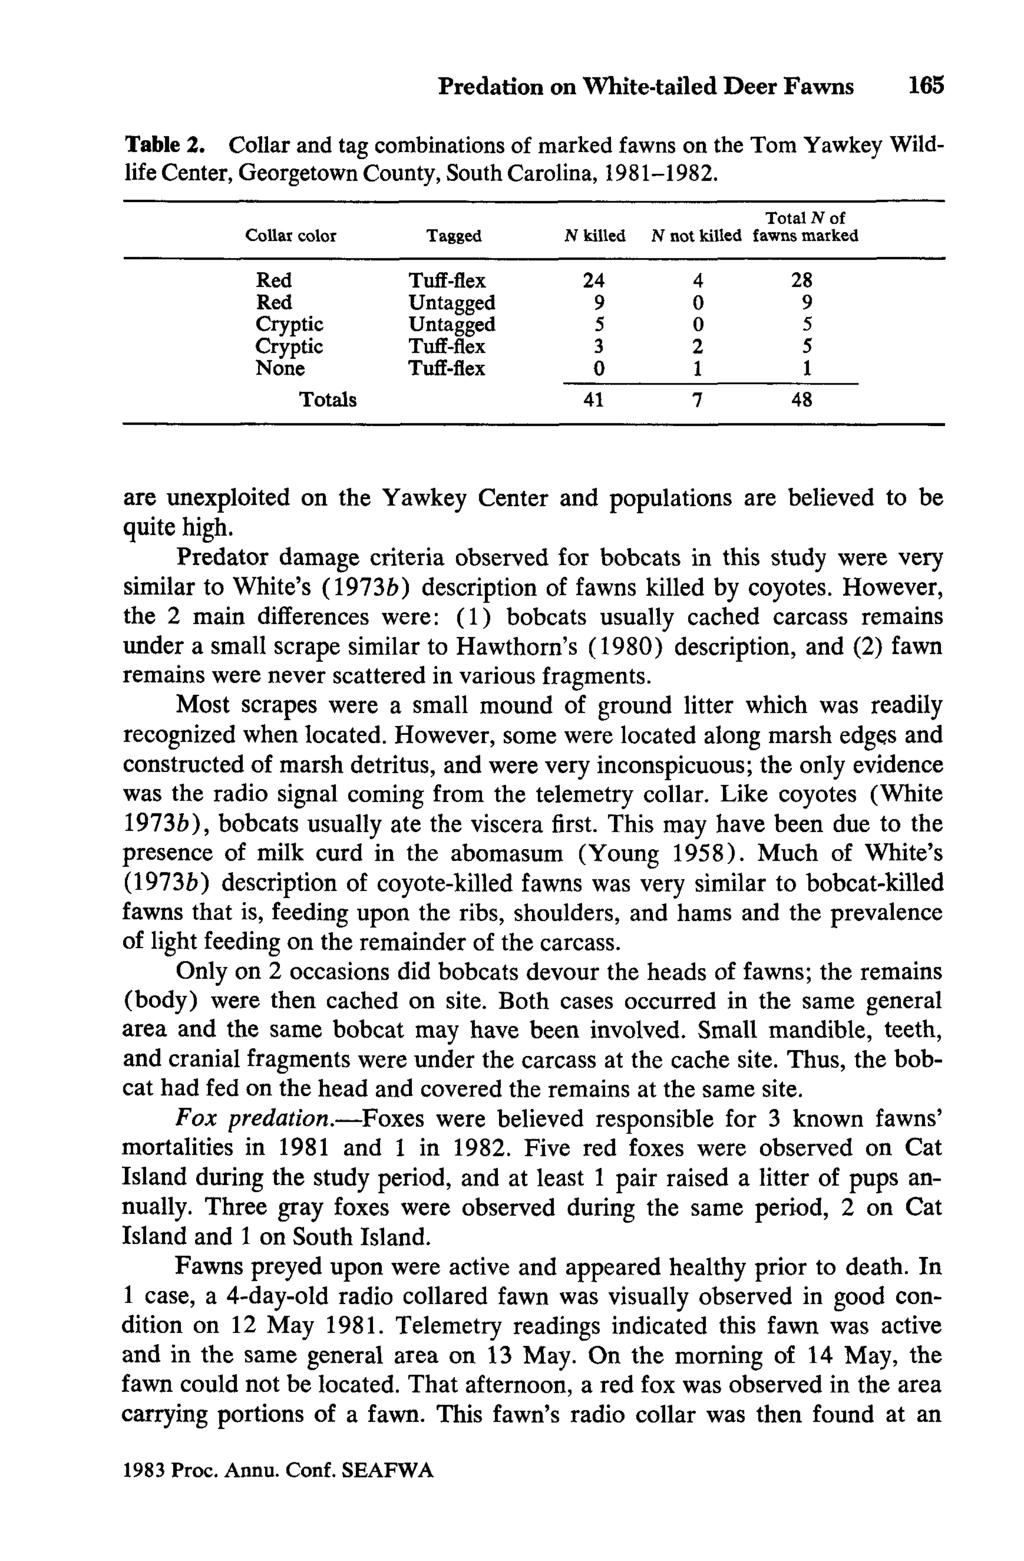 Predation on White-tailed Deer Fawns 165 Table 2. Collar and tag combinations of marked fawns on the Tom Yawkey Wildlife Center, Georgetown County, South Carolina, 1981-1982.